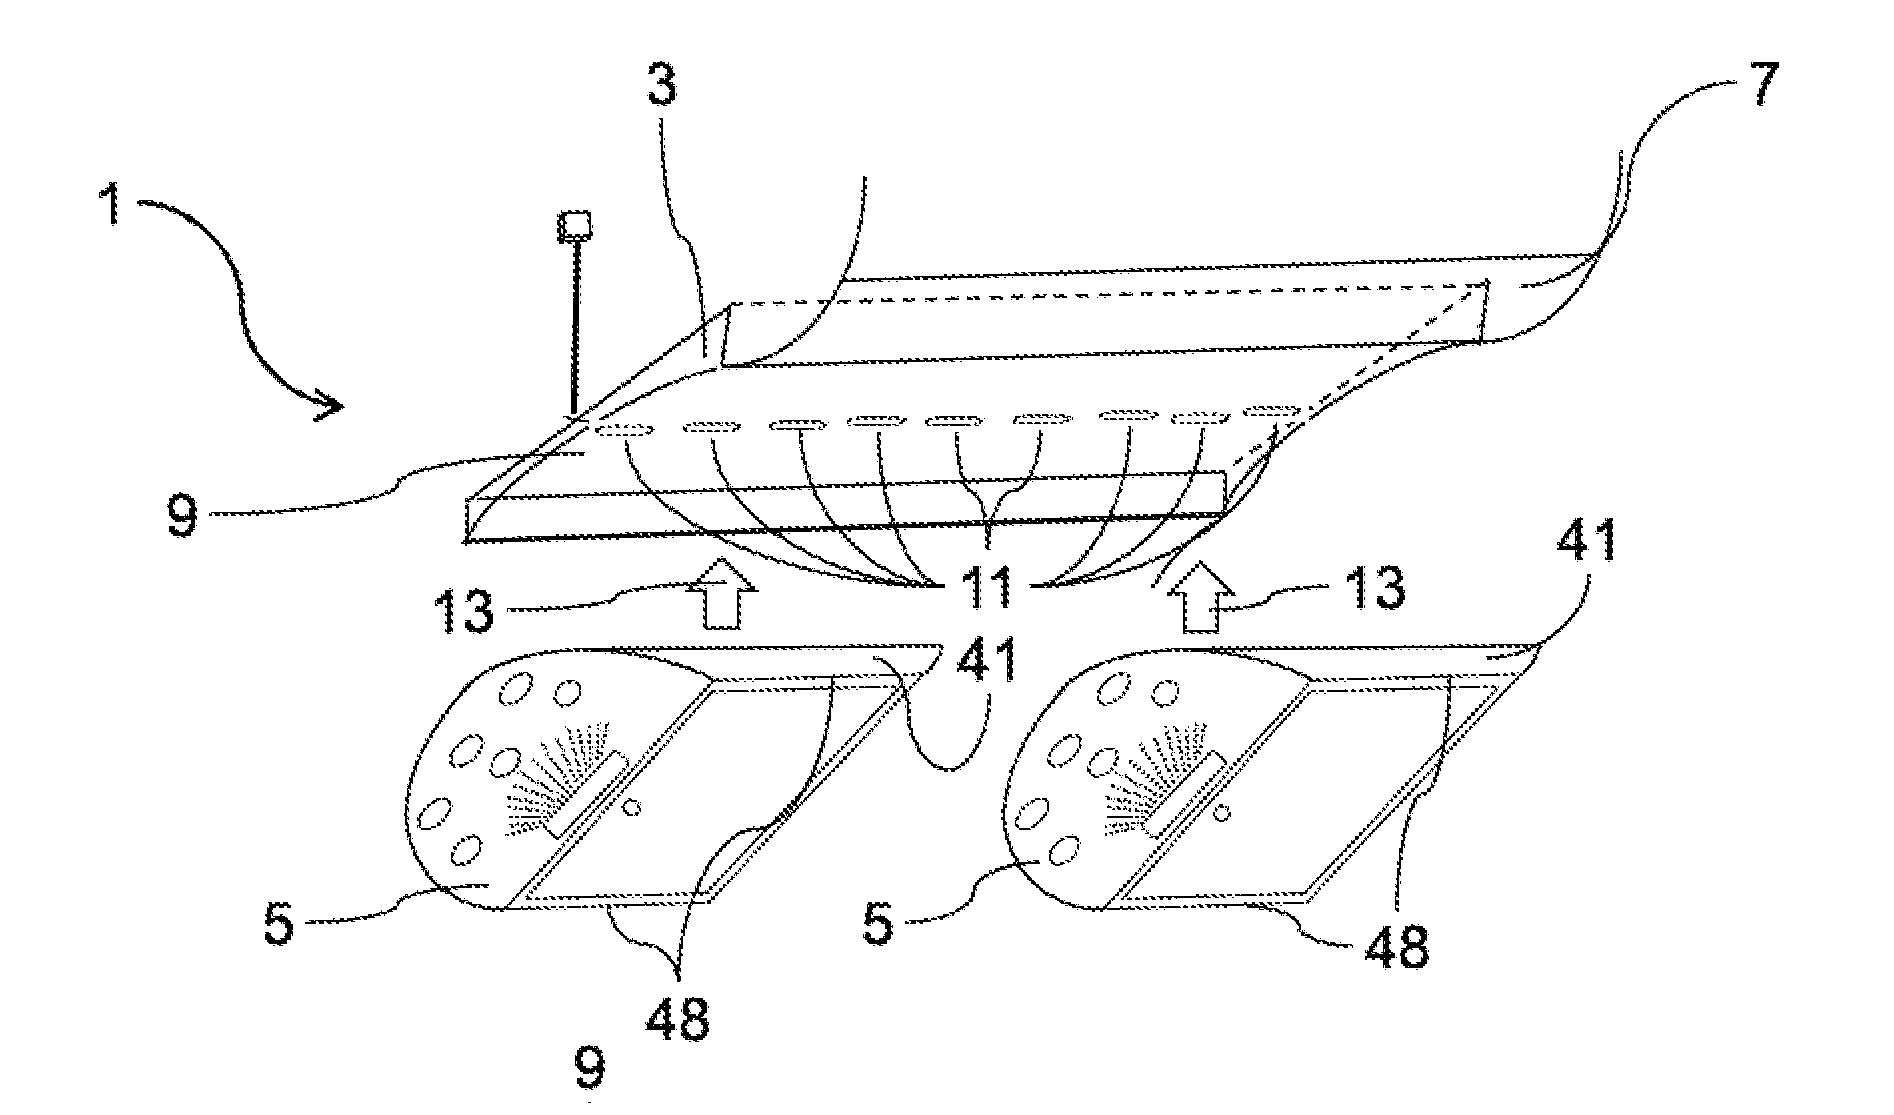 Panel for mounting a passenger supply unit and a passenger supply unit